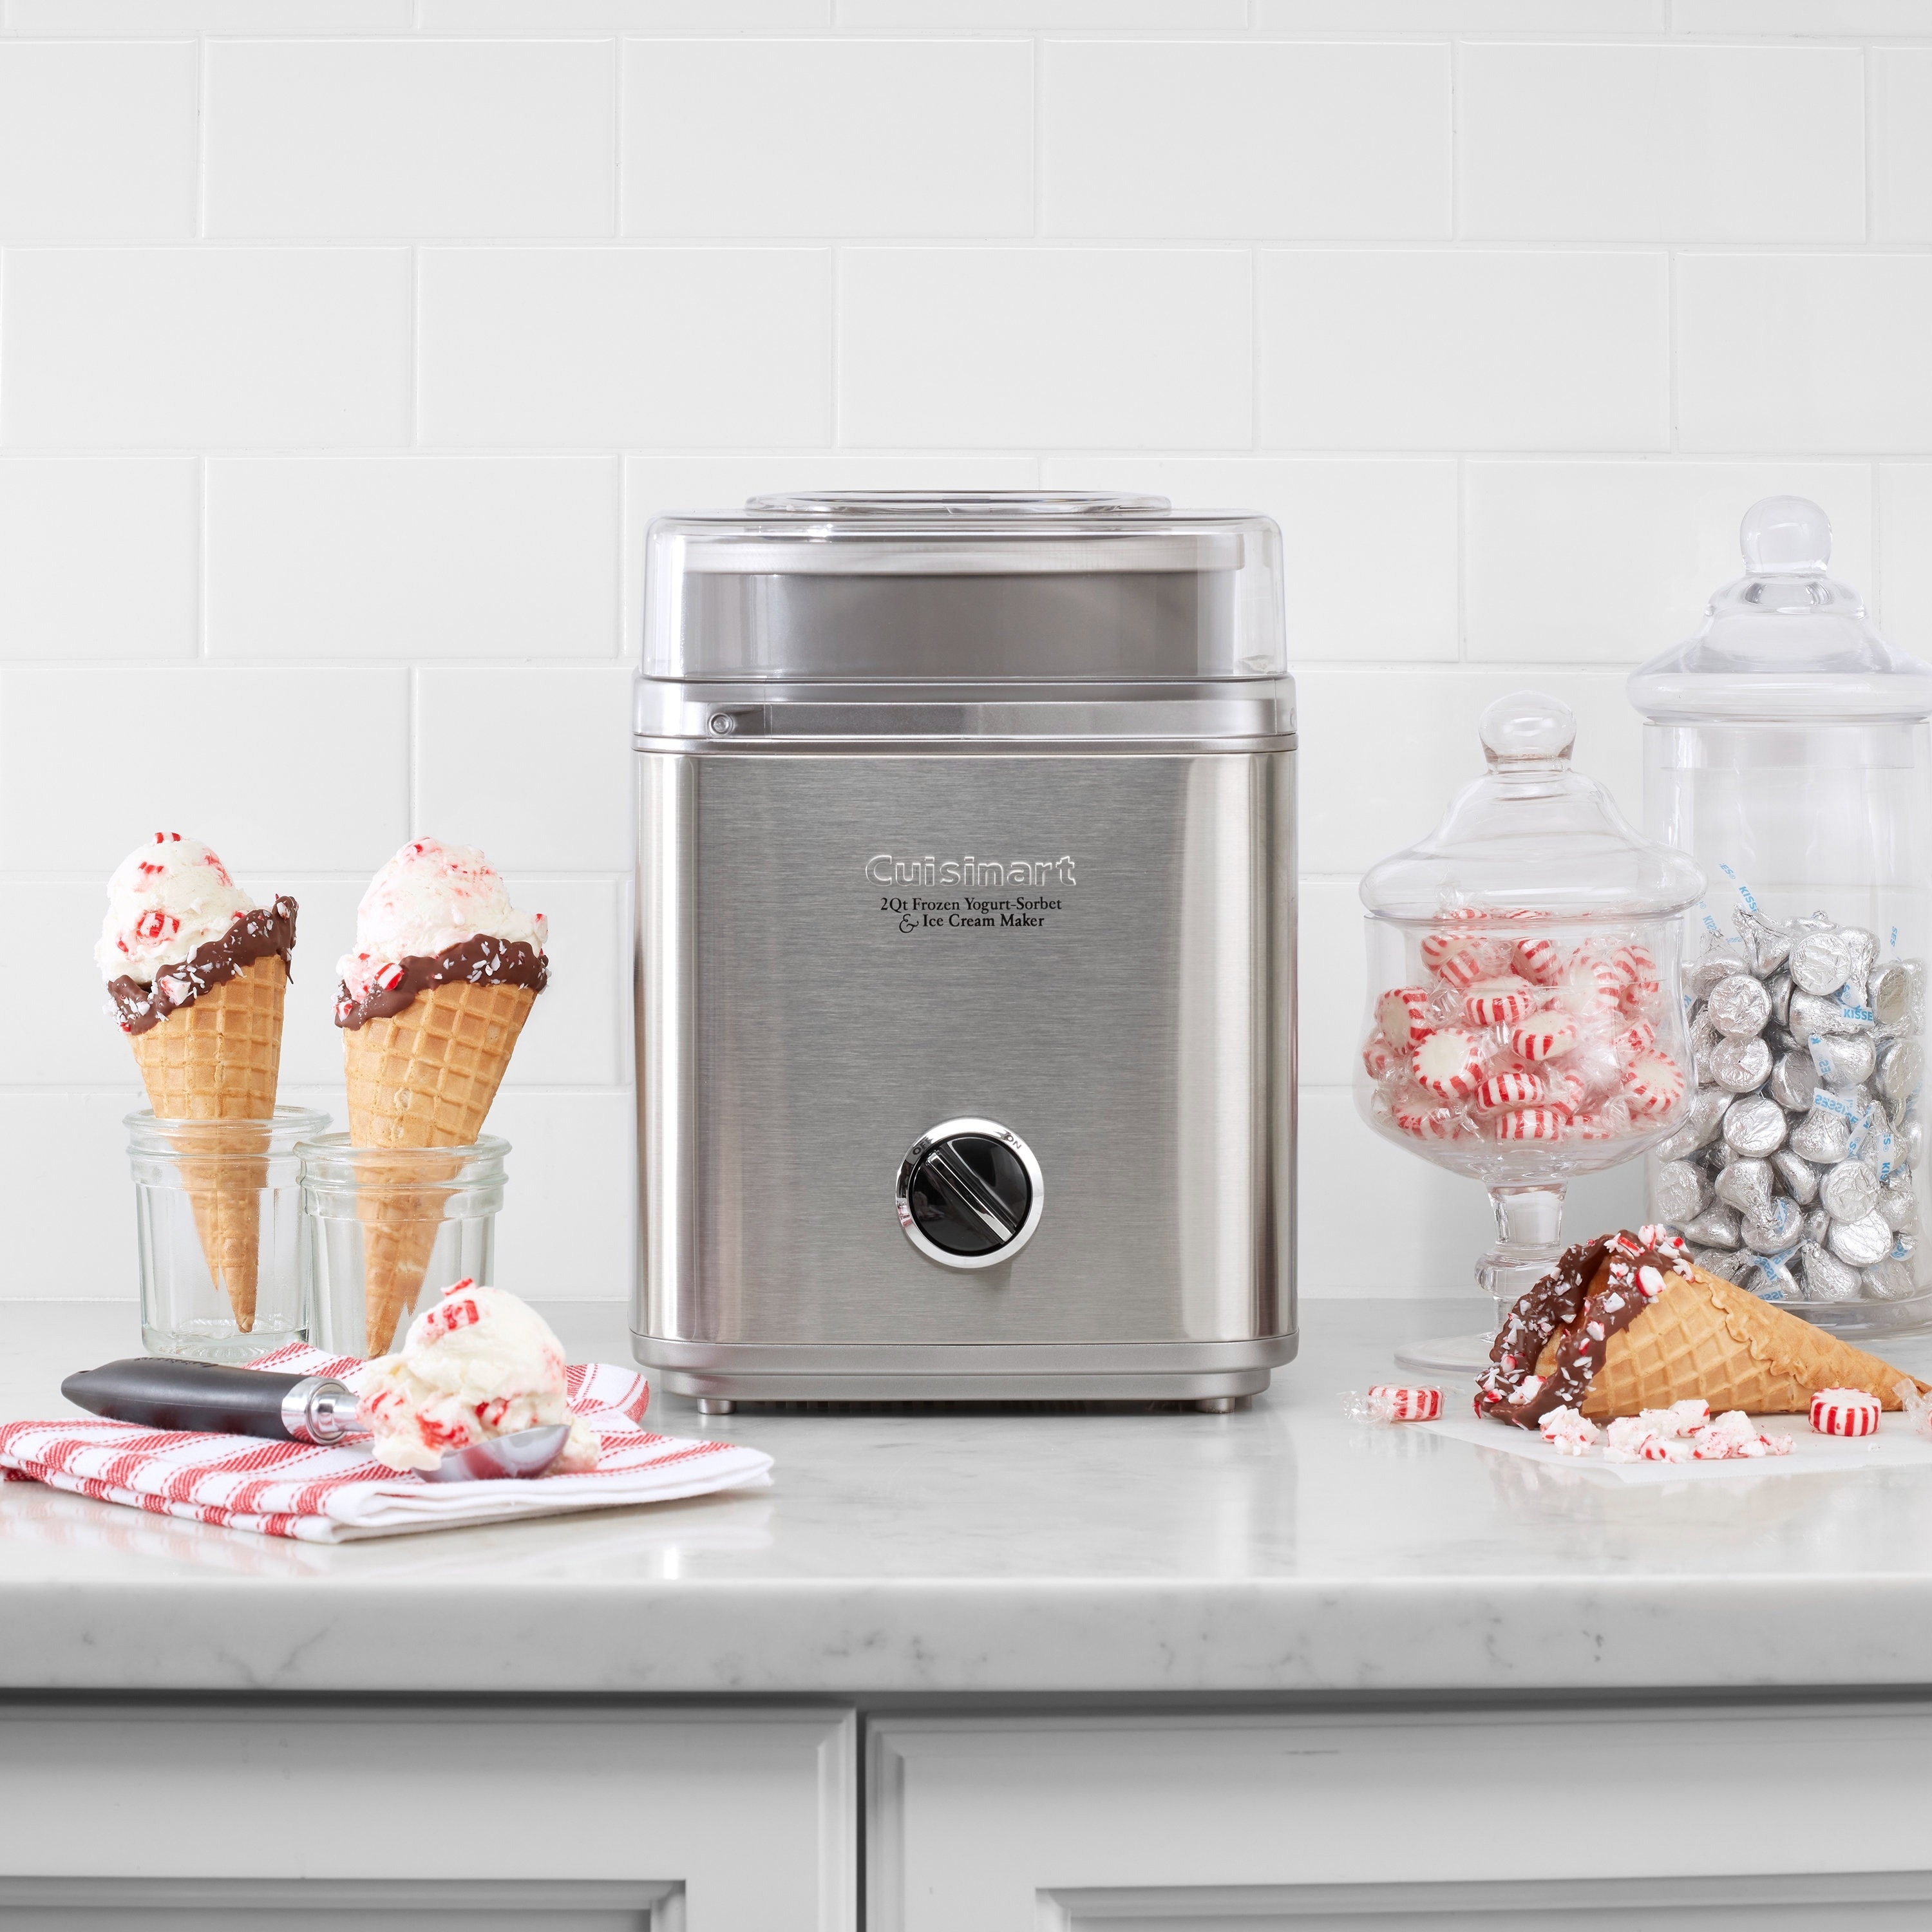 Cuisinart ice cream maker on a counter with two cones filled with scoops of ice cream beside it